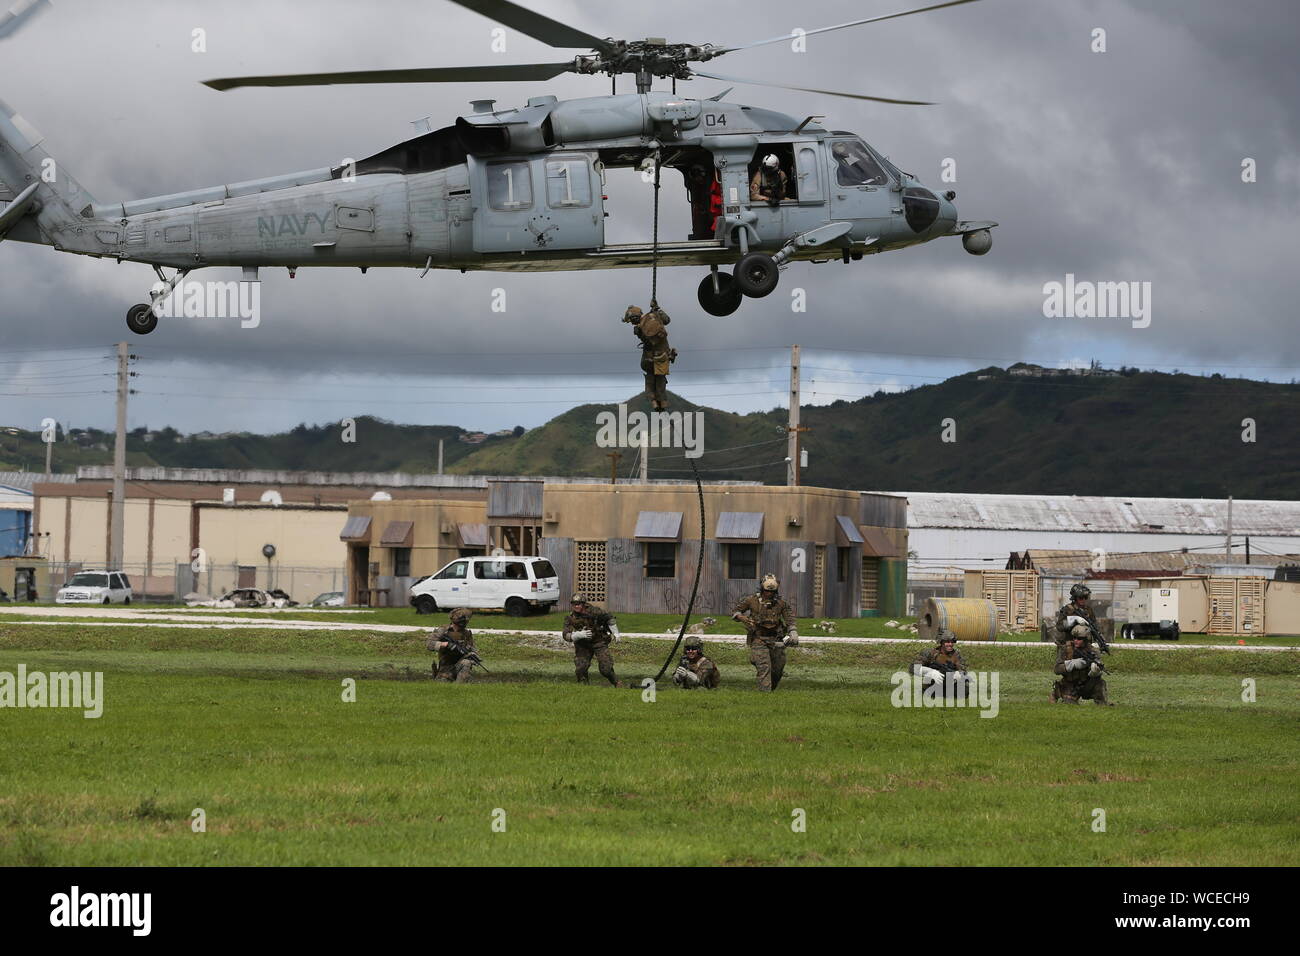 U.S. Marines with 3rd Reconnaissance Battalion, 3rd Marine Division, conduct helicopter rope suspension training from a MH-60S Seahawk helicopter during exercise HYDRACRAB in Santa Rita, Guam, Aug. 19, 2019. HYDRACRAB is a multilateral exercise conducted by U.S. Marines and Sailors with military service members from Australia, Canada, and New Zealand. The purpose of this exercise is to prepare the participating Explosive Ordnance Disposal forces to operate as an integrated, capable, and effective allied force ready to operate in a changing and complex maritime environment throughout the Indo-P Stock Photo